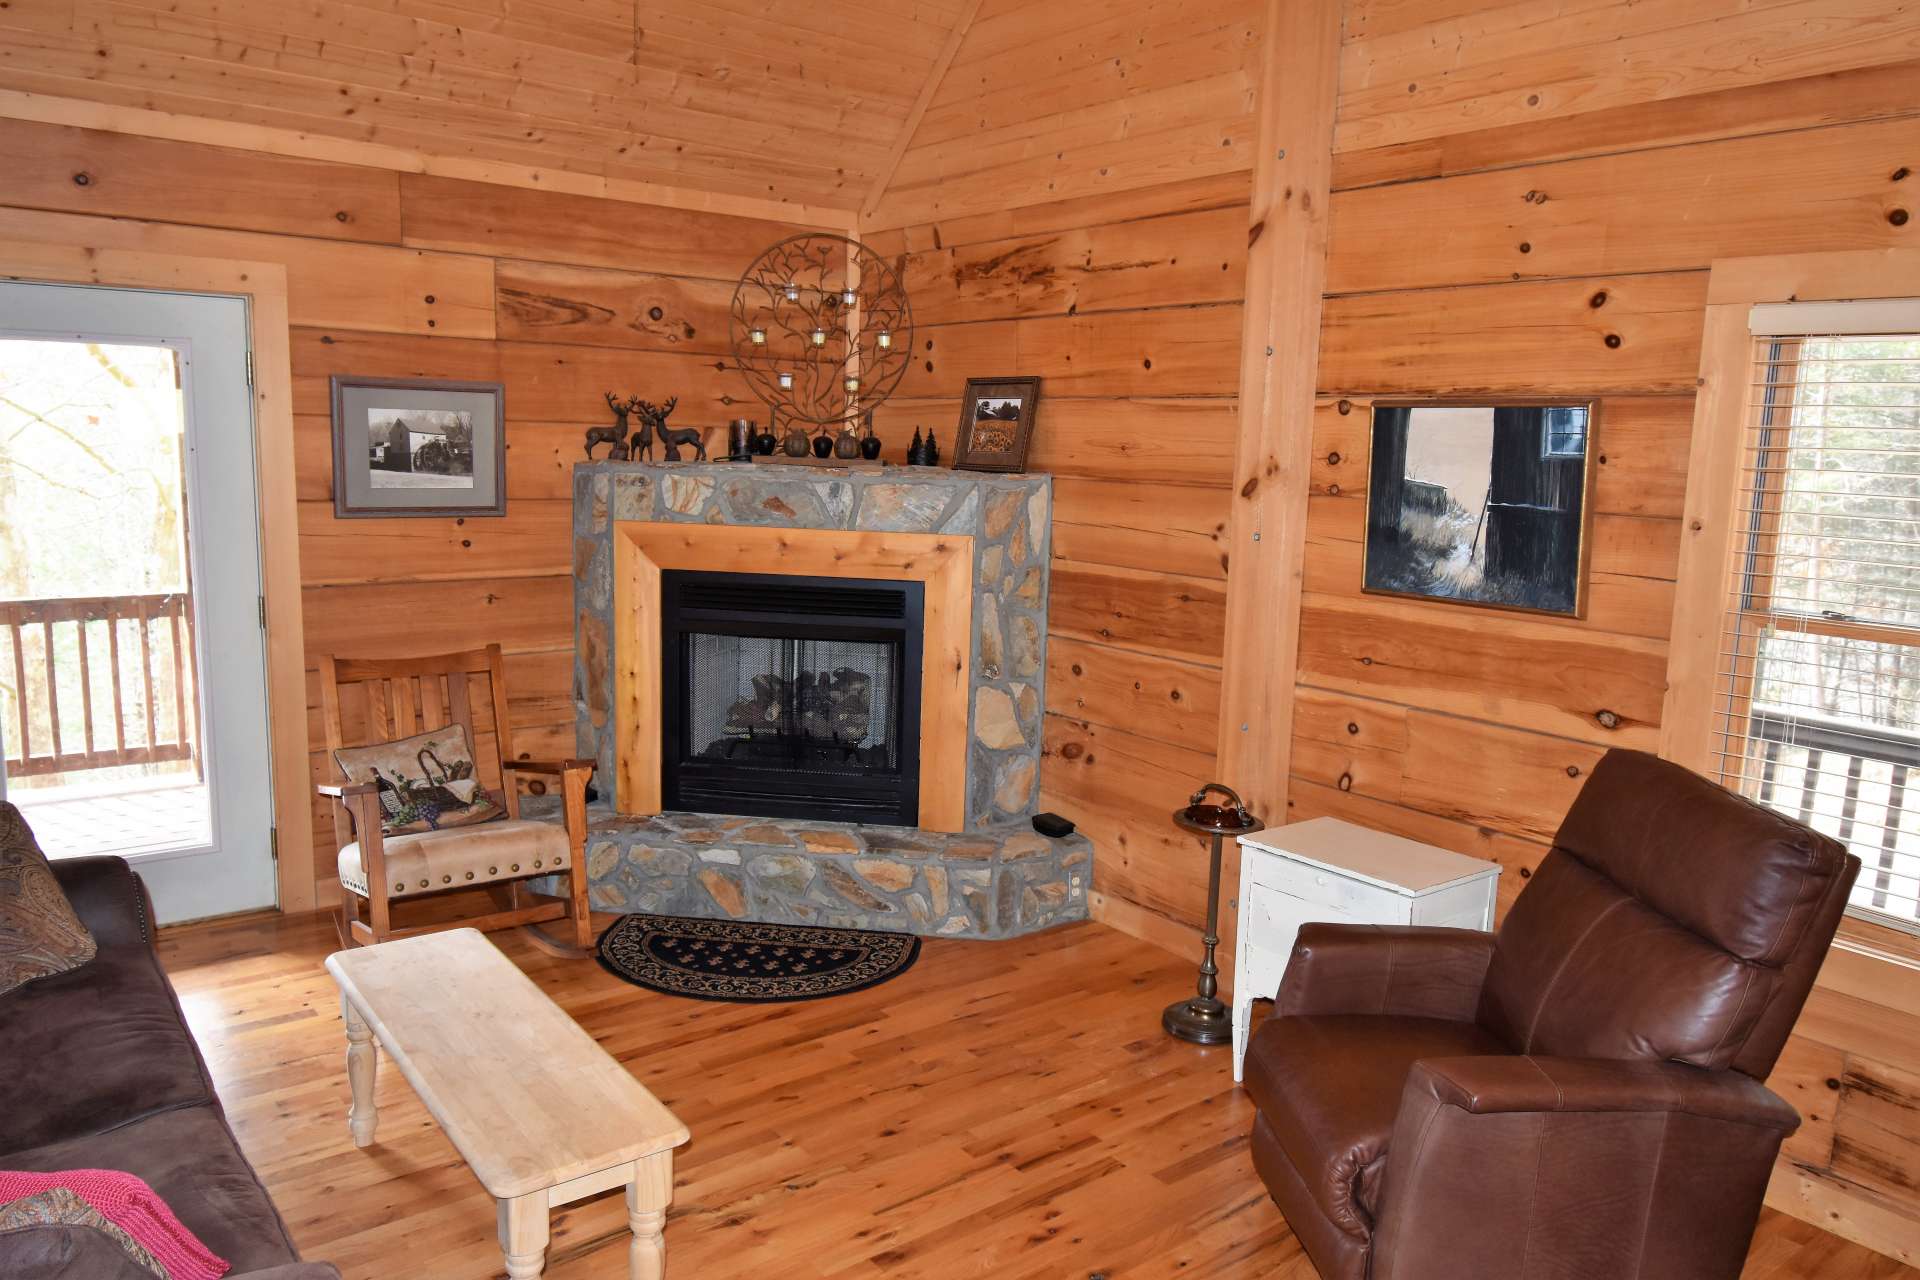 This cozy 2-bedroom, plus loft, 2-bath cabin offers a true mountain retreat.  The great room features a vaulted ceiling, wood floors and a gas log fireplace to warm up those cool winter evenings.